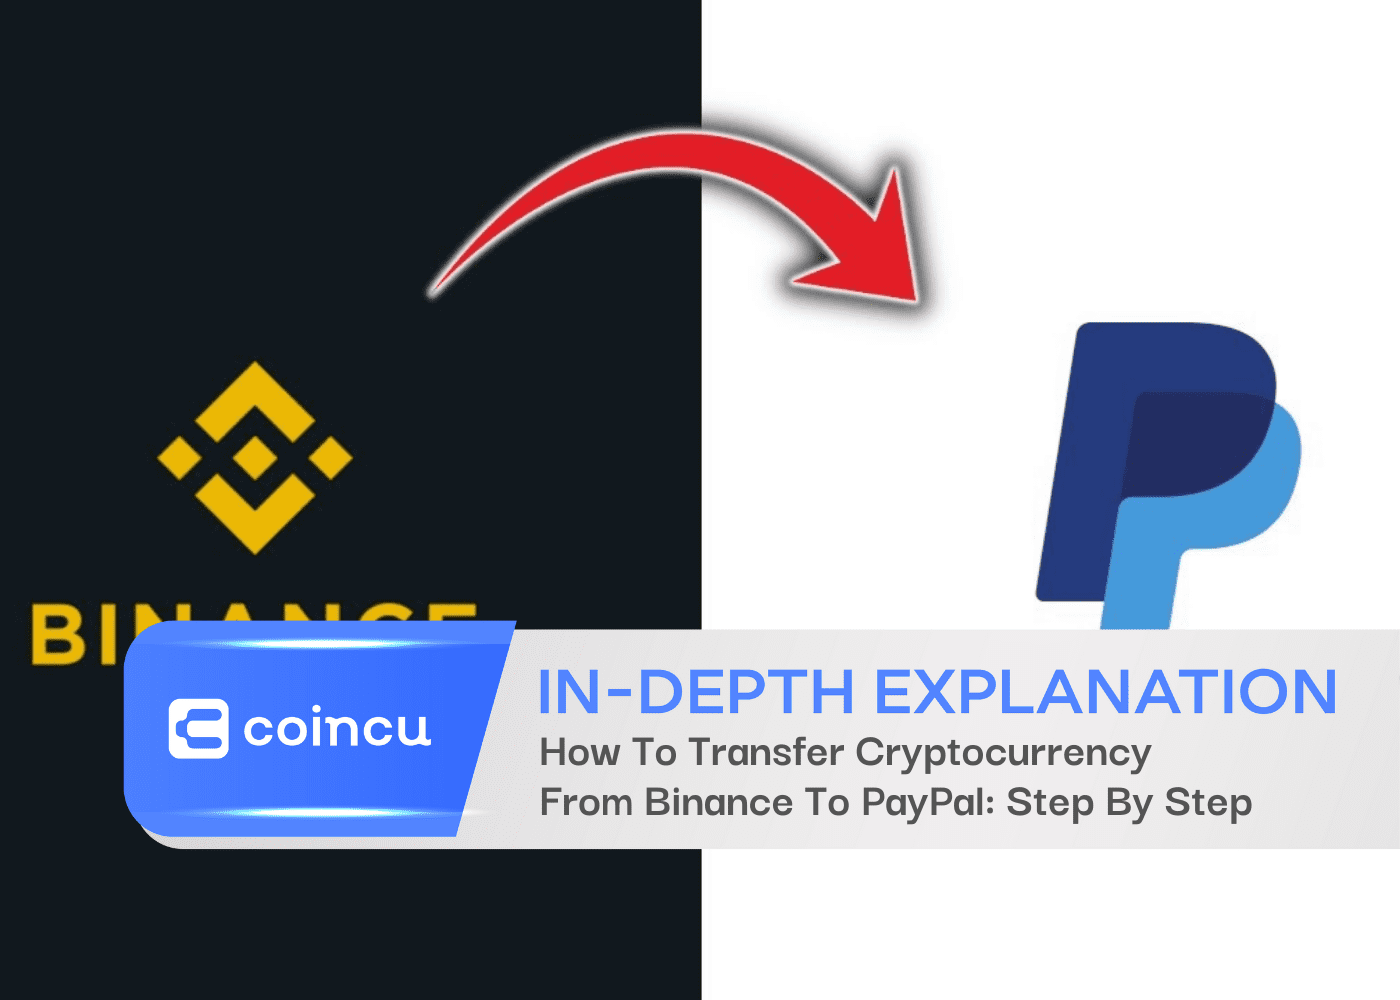 From Binance To PayPal Step By Step